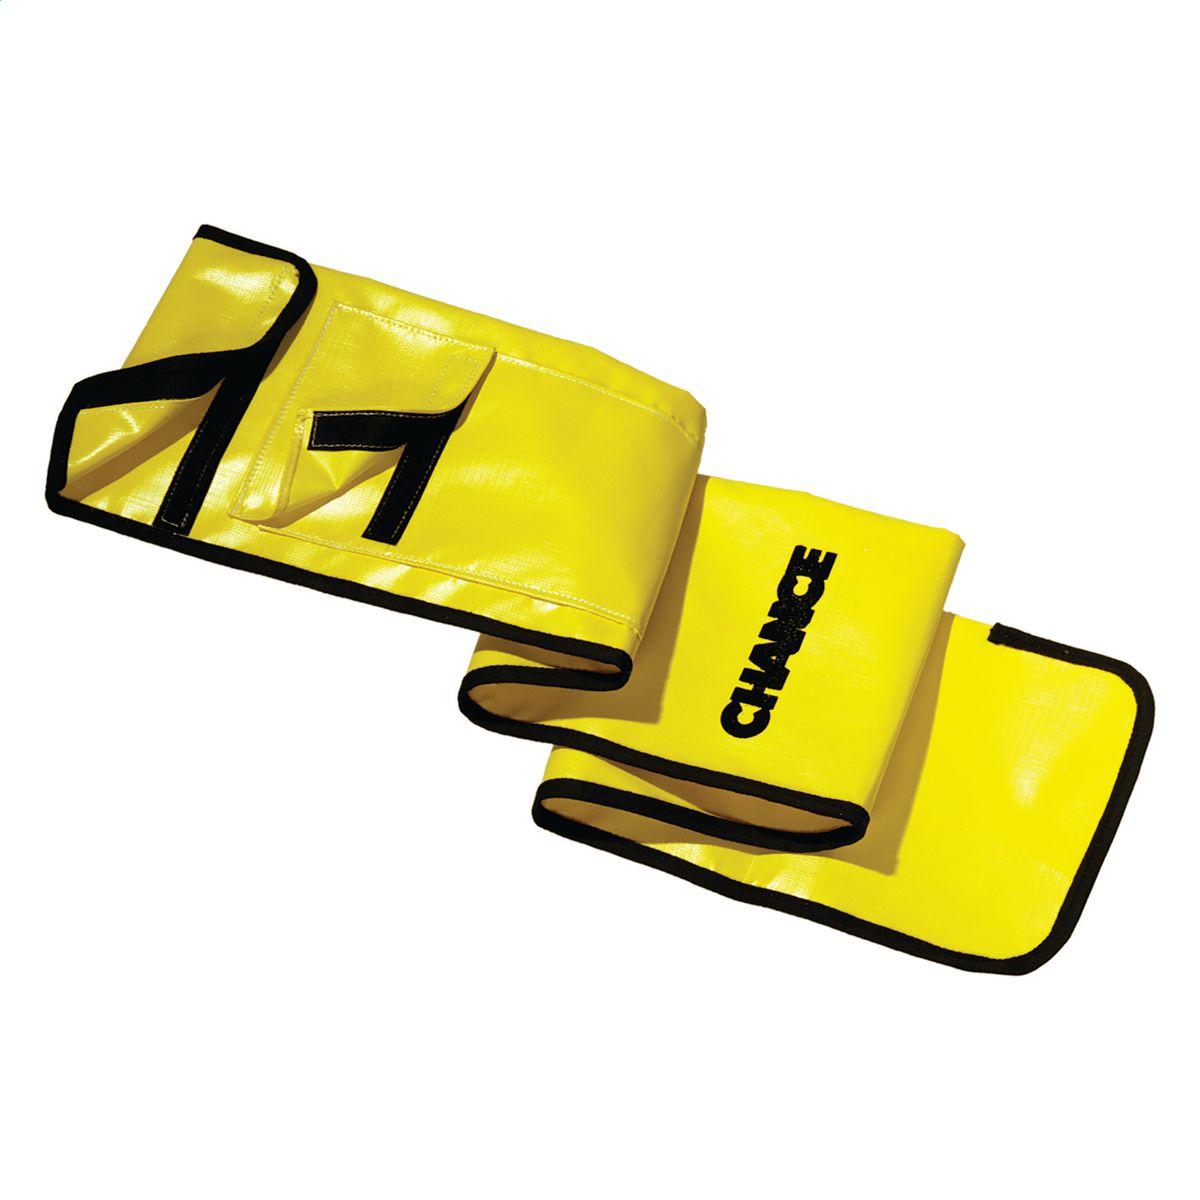 Hubbell P6408 TOOL BAG, 8' 11" L X 11" W, Chance waterproof storage bags help guard against contaminants and abrasion to help maintain the insulating properties of hotline tools. Yellow heavy-duty vinyl-impregnated fabric lasts for years of rugged service. Snaps, Velcr